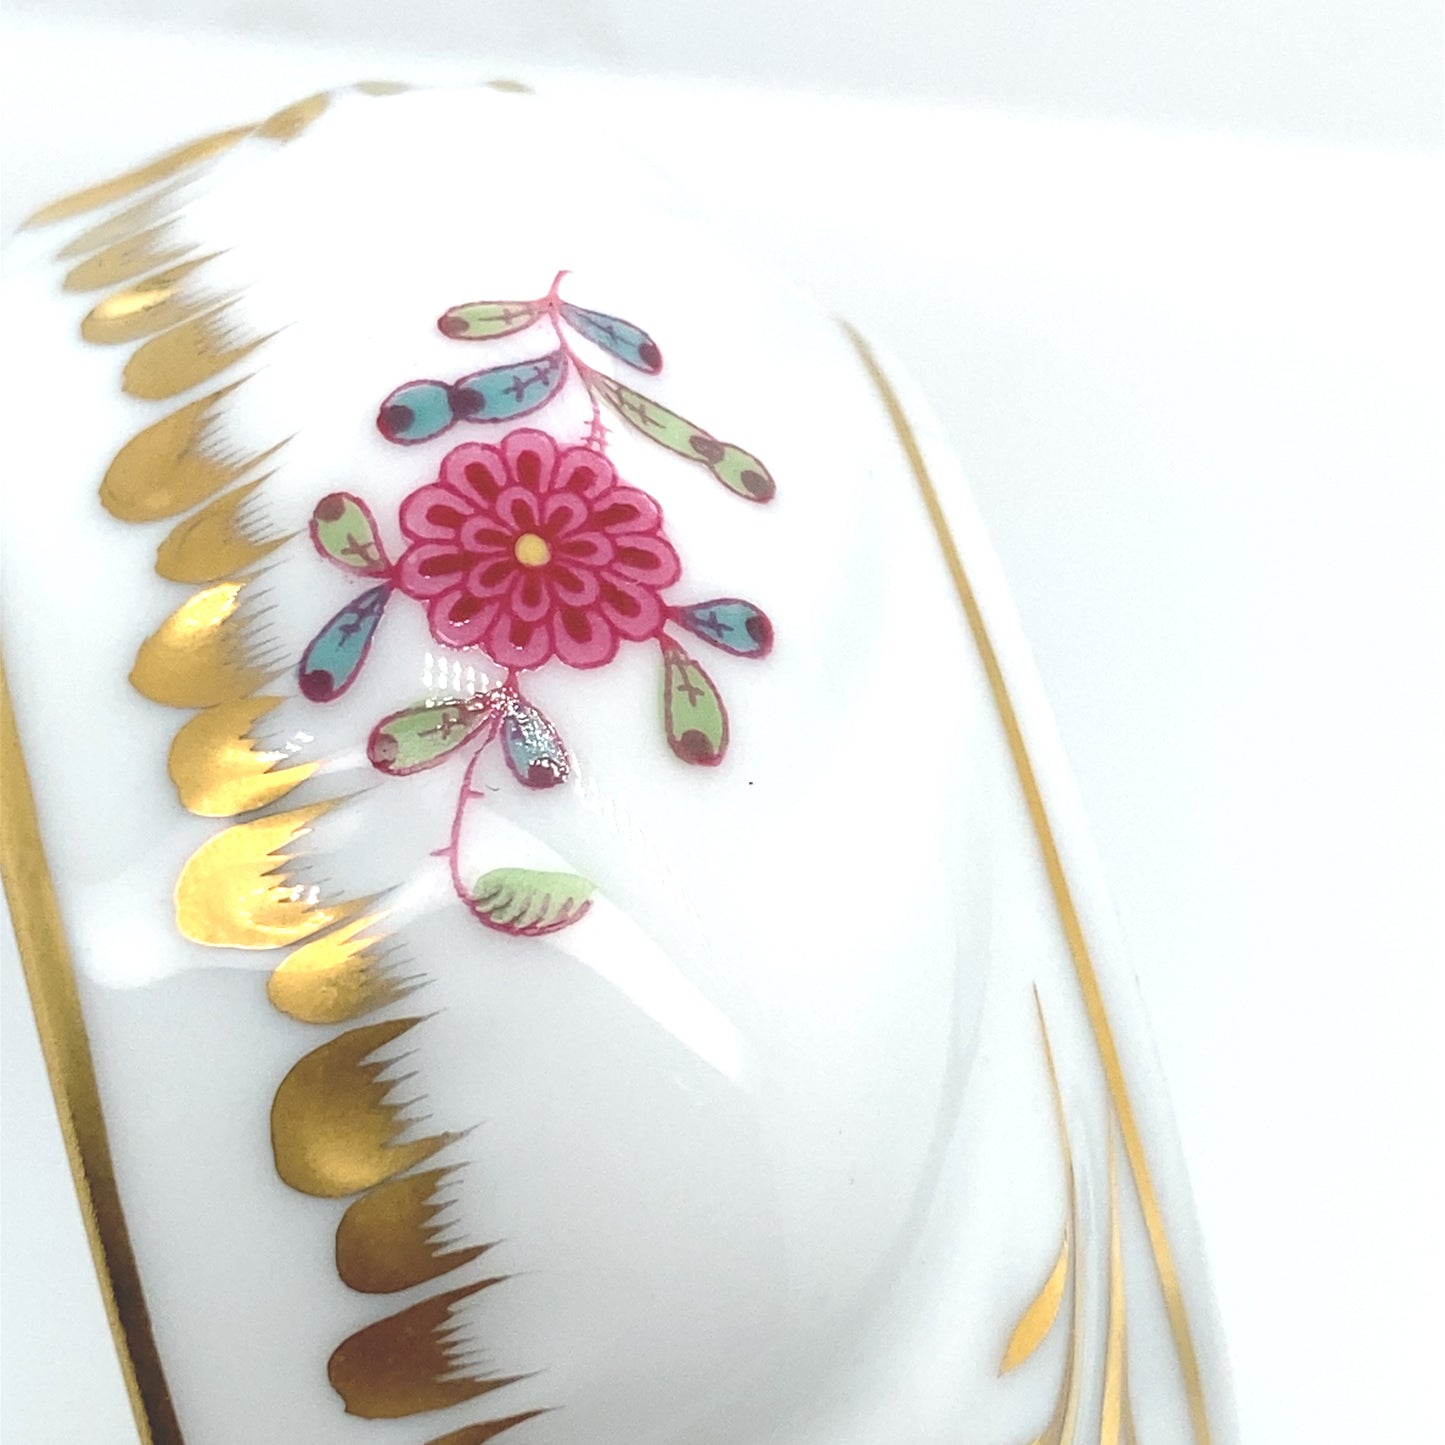 Herend jewelry or candy box from Hungary.  Hand painted designed with gold. Beautiful piece.